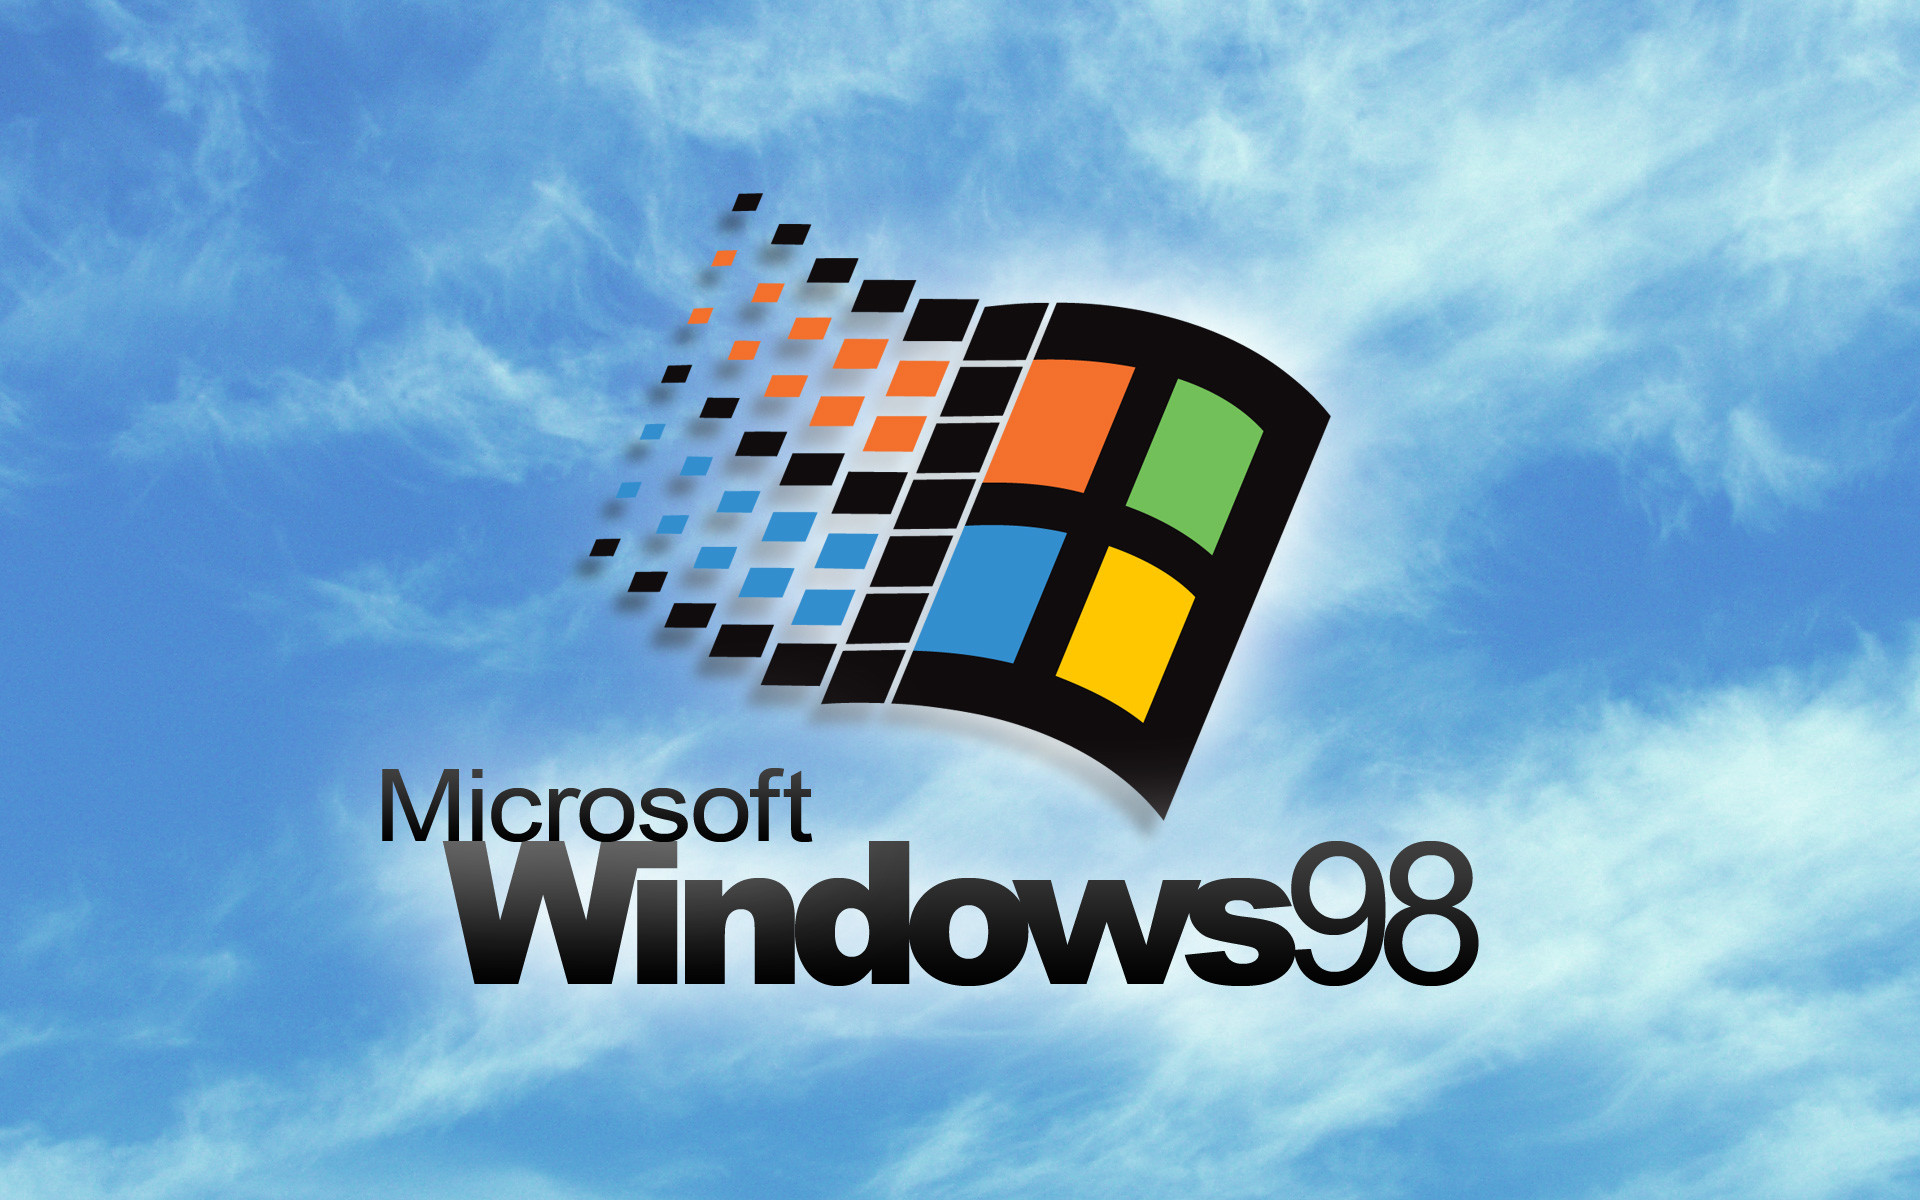 1920x1200 Large Windows 98 Wallpaper by jlsgraphics Large Windows 98 Wallpaper by  jlsgraphics